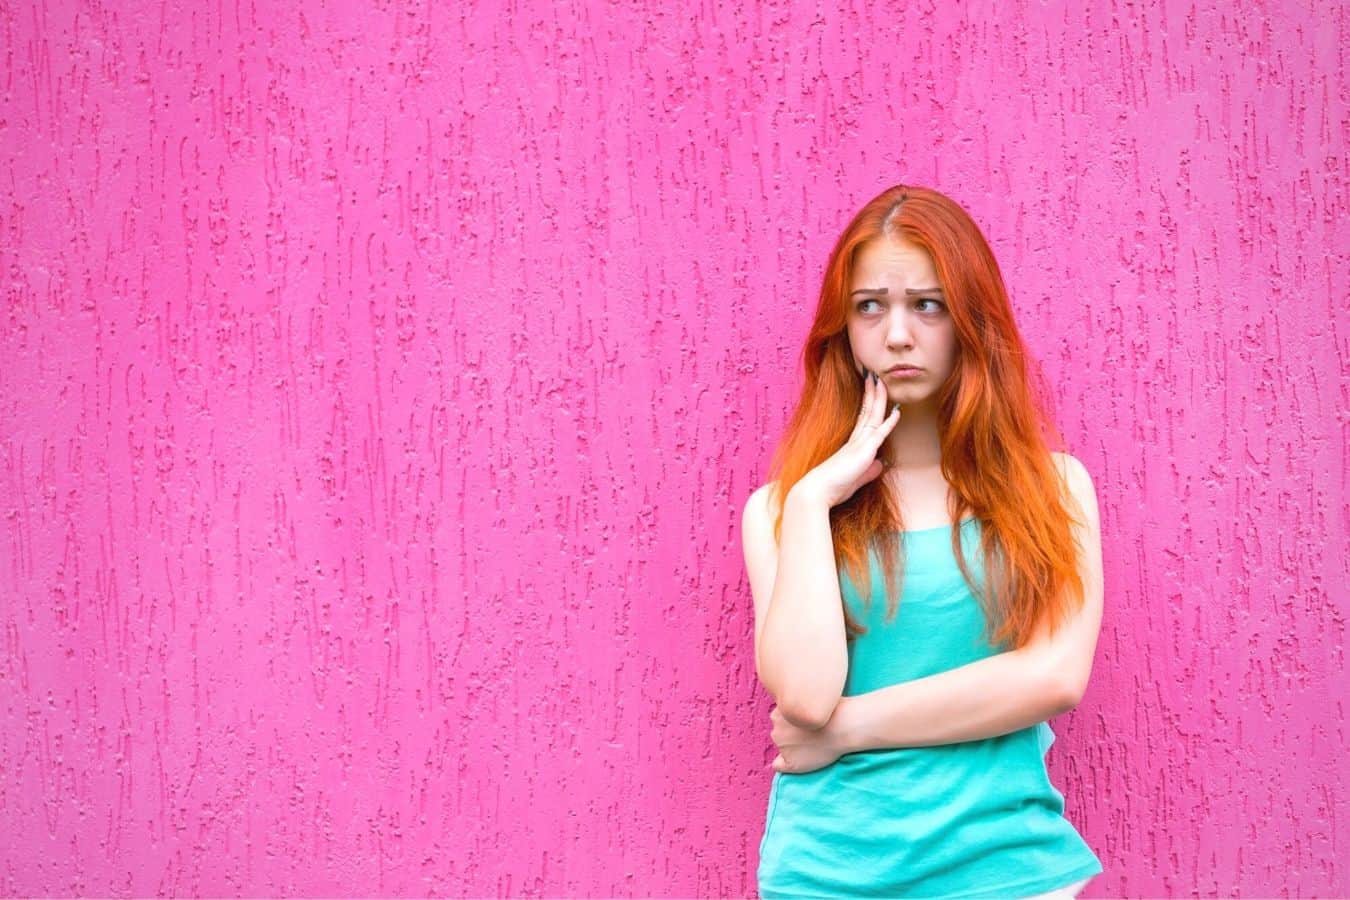 Woman with long red hair looking sad, stood in front of a pink wall.